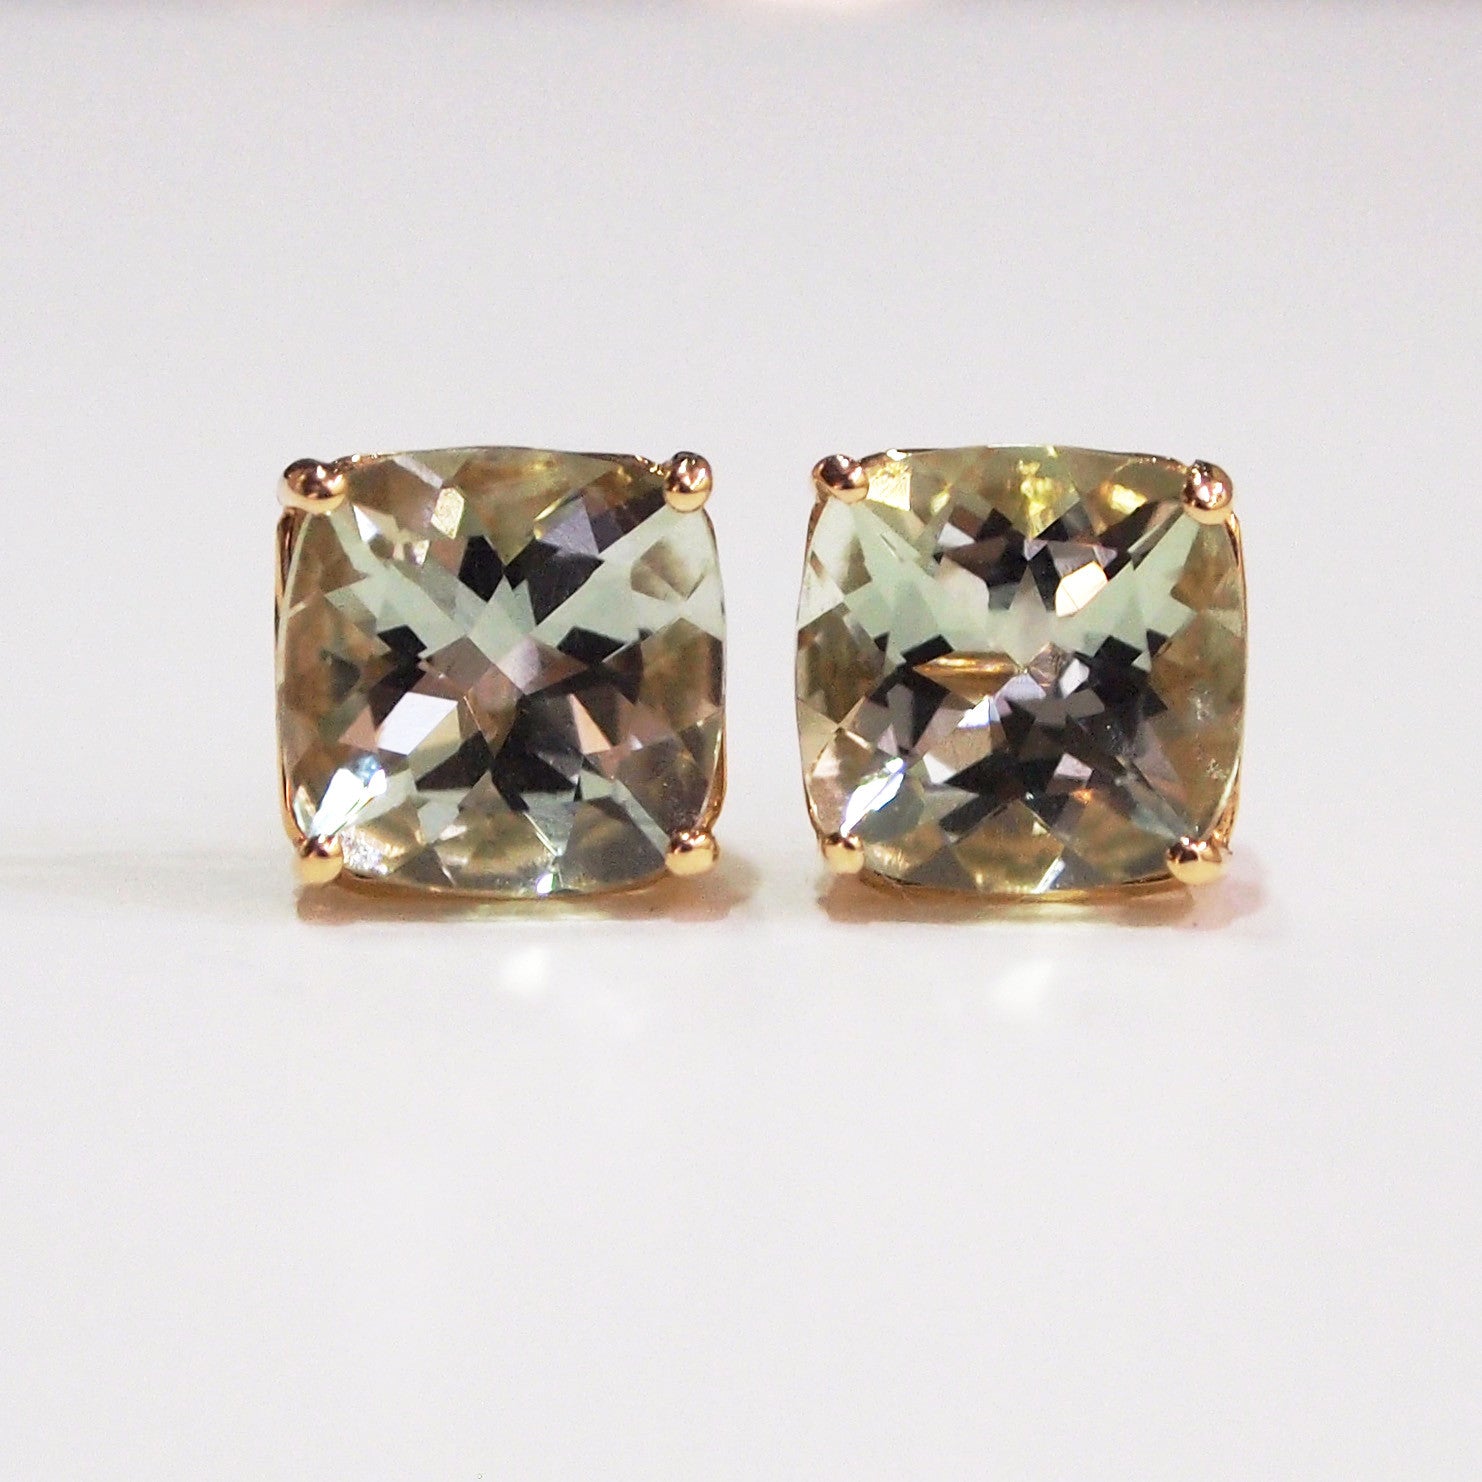 14K yellow gold four-prong stud earrings with two cushion-cut green amethysts